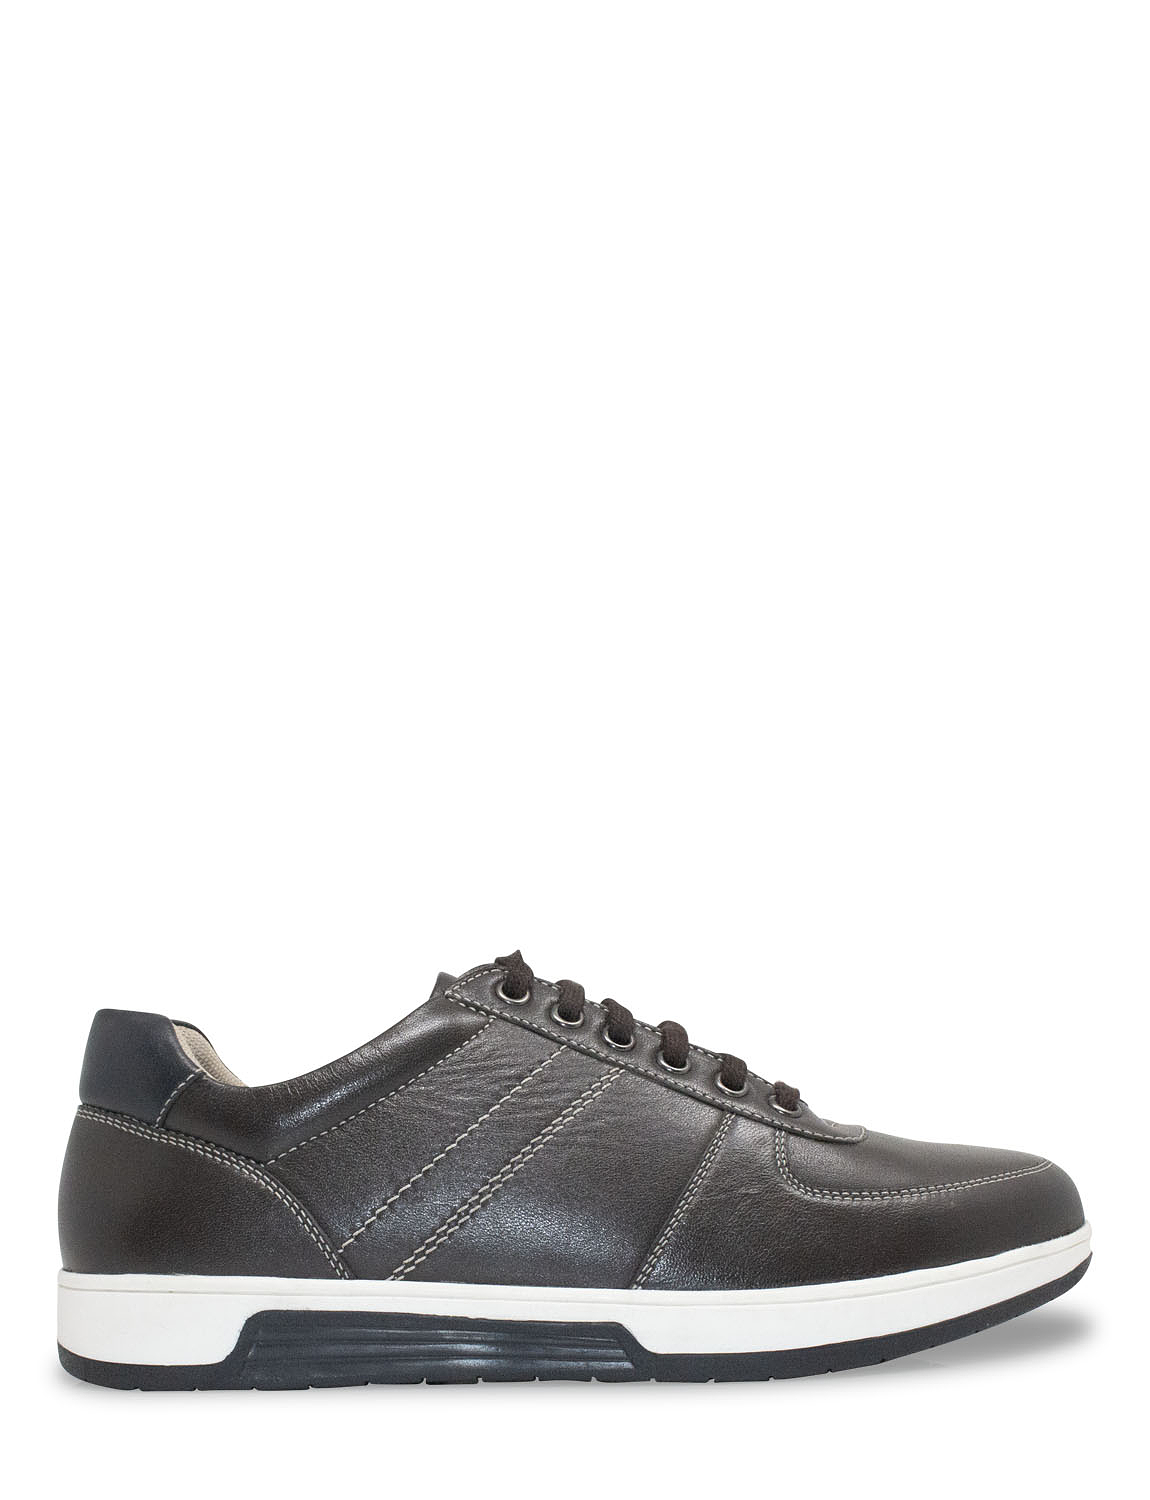 Pegasus Leather Lace Wide Fit Trainer | Chums